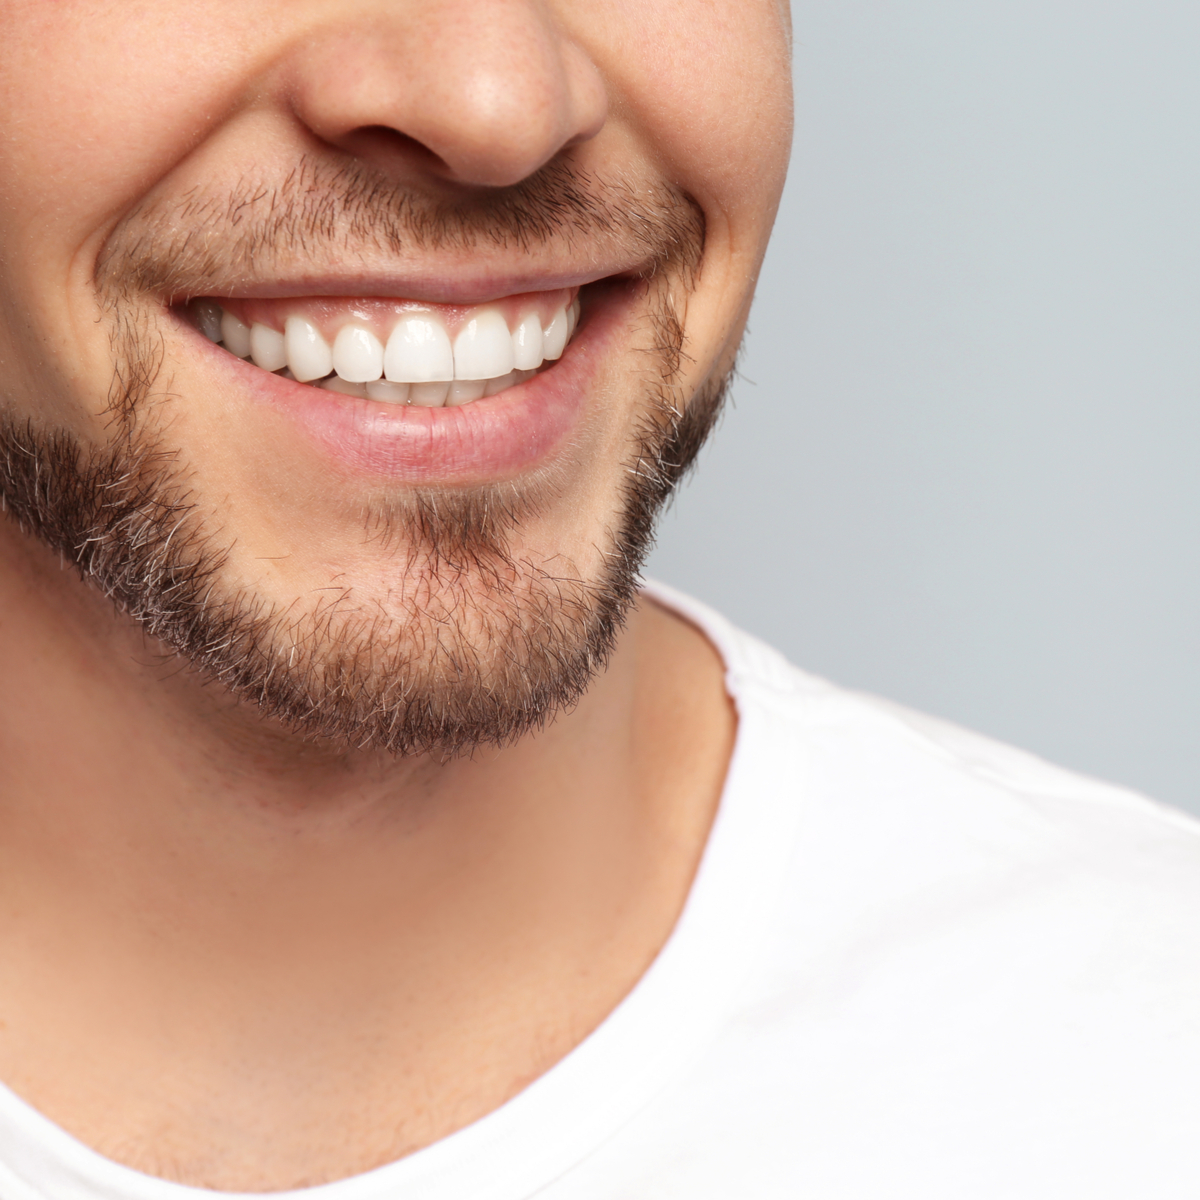 What Can Veneers Do For Your Smile?